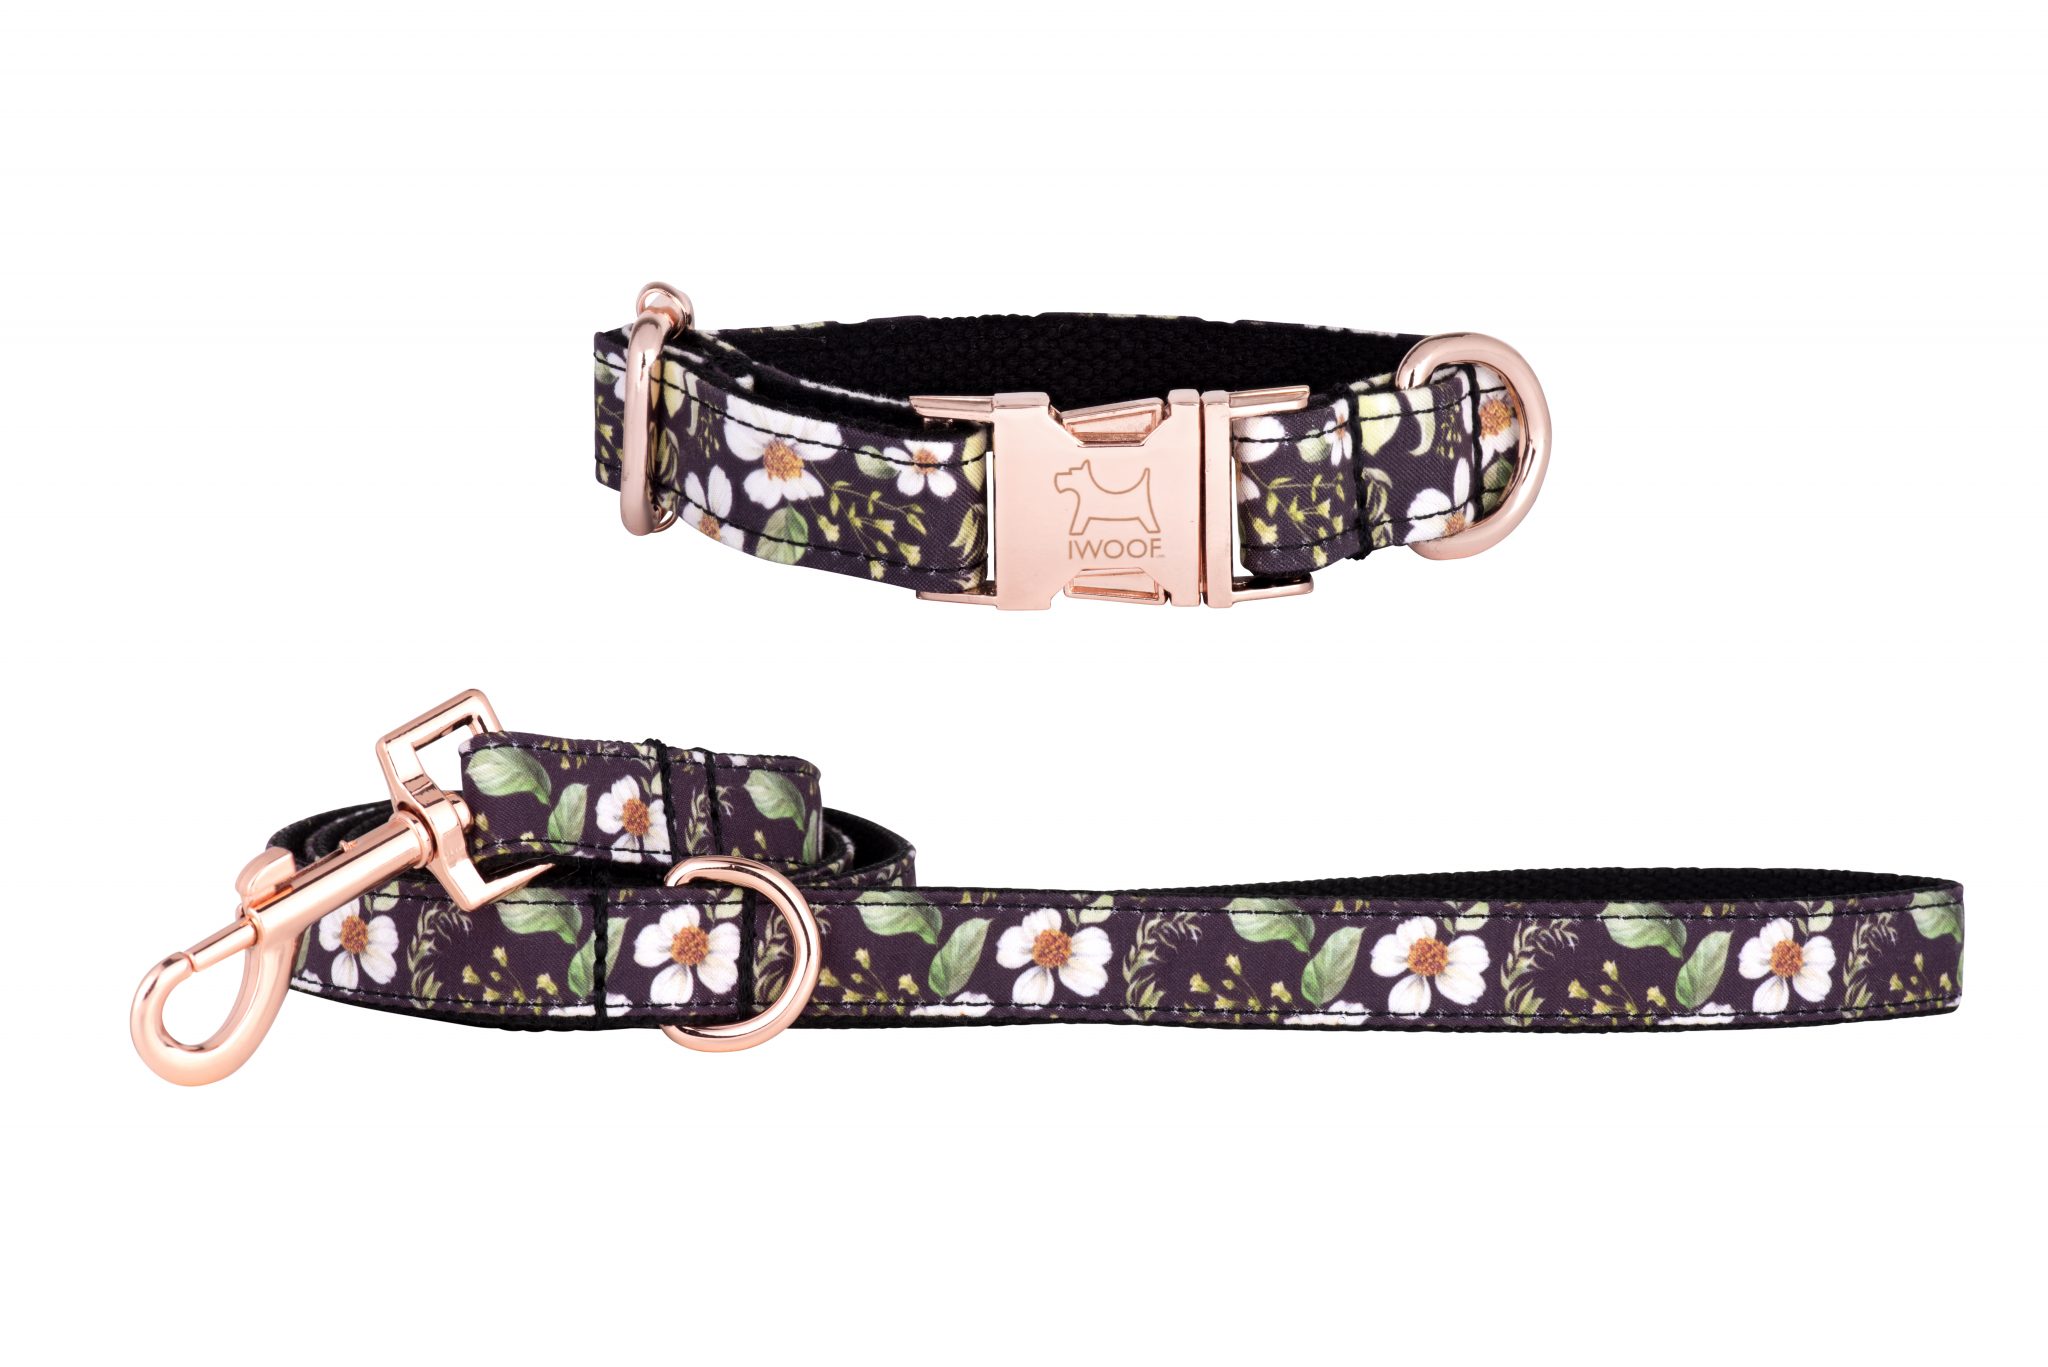 CADGWITH Designer Dog Collar and Lead set in Rose Gold